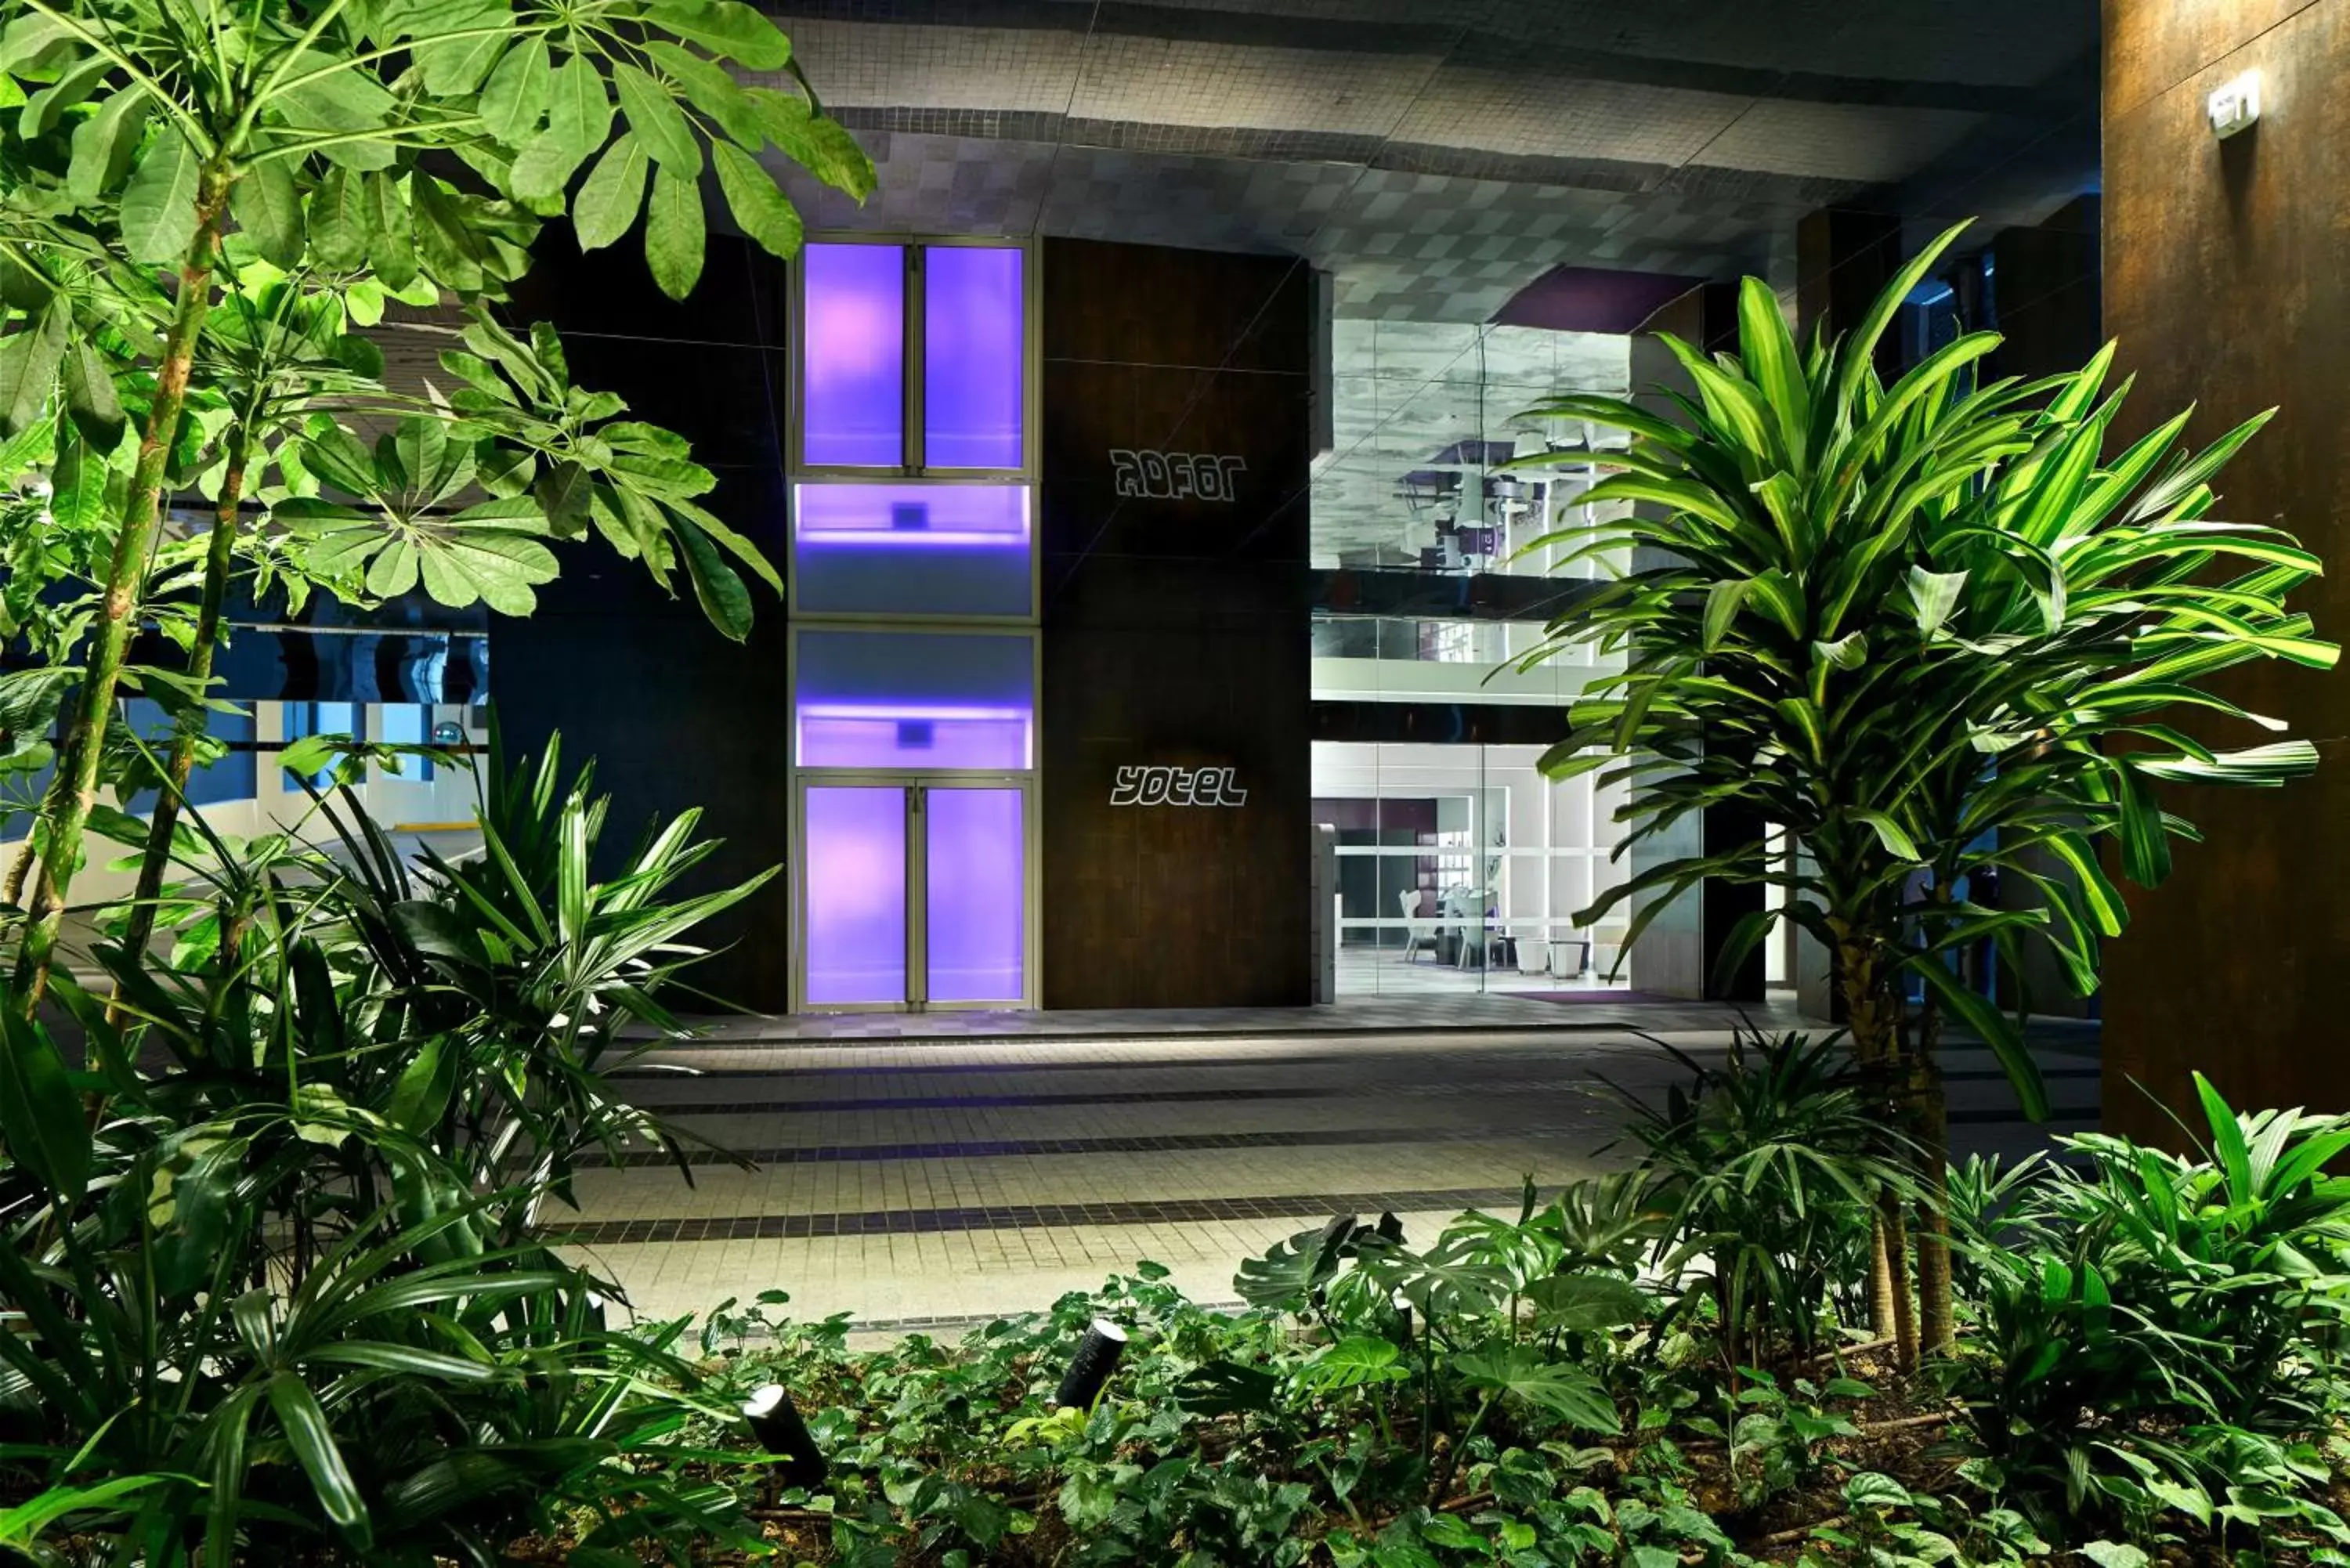 Property building in YOTEL Singapore Orchard Road